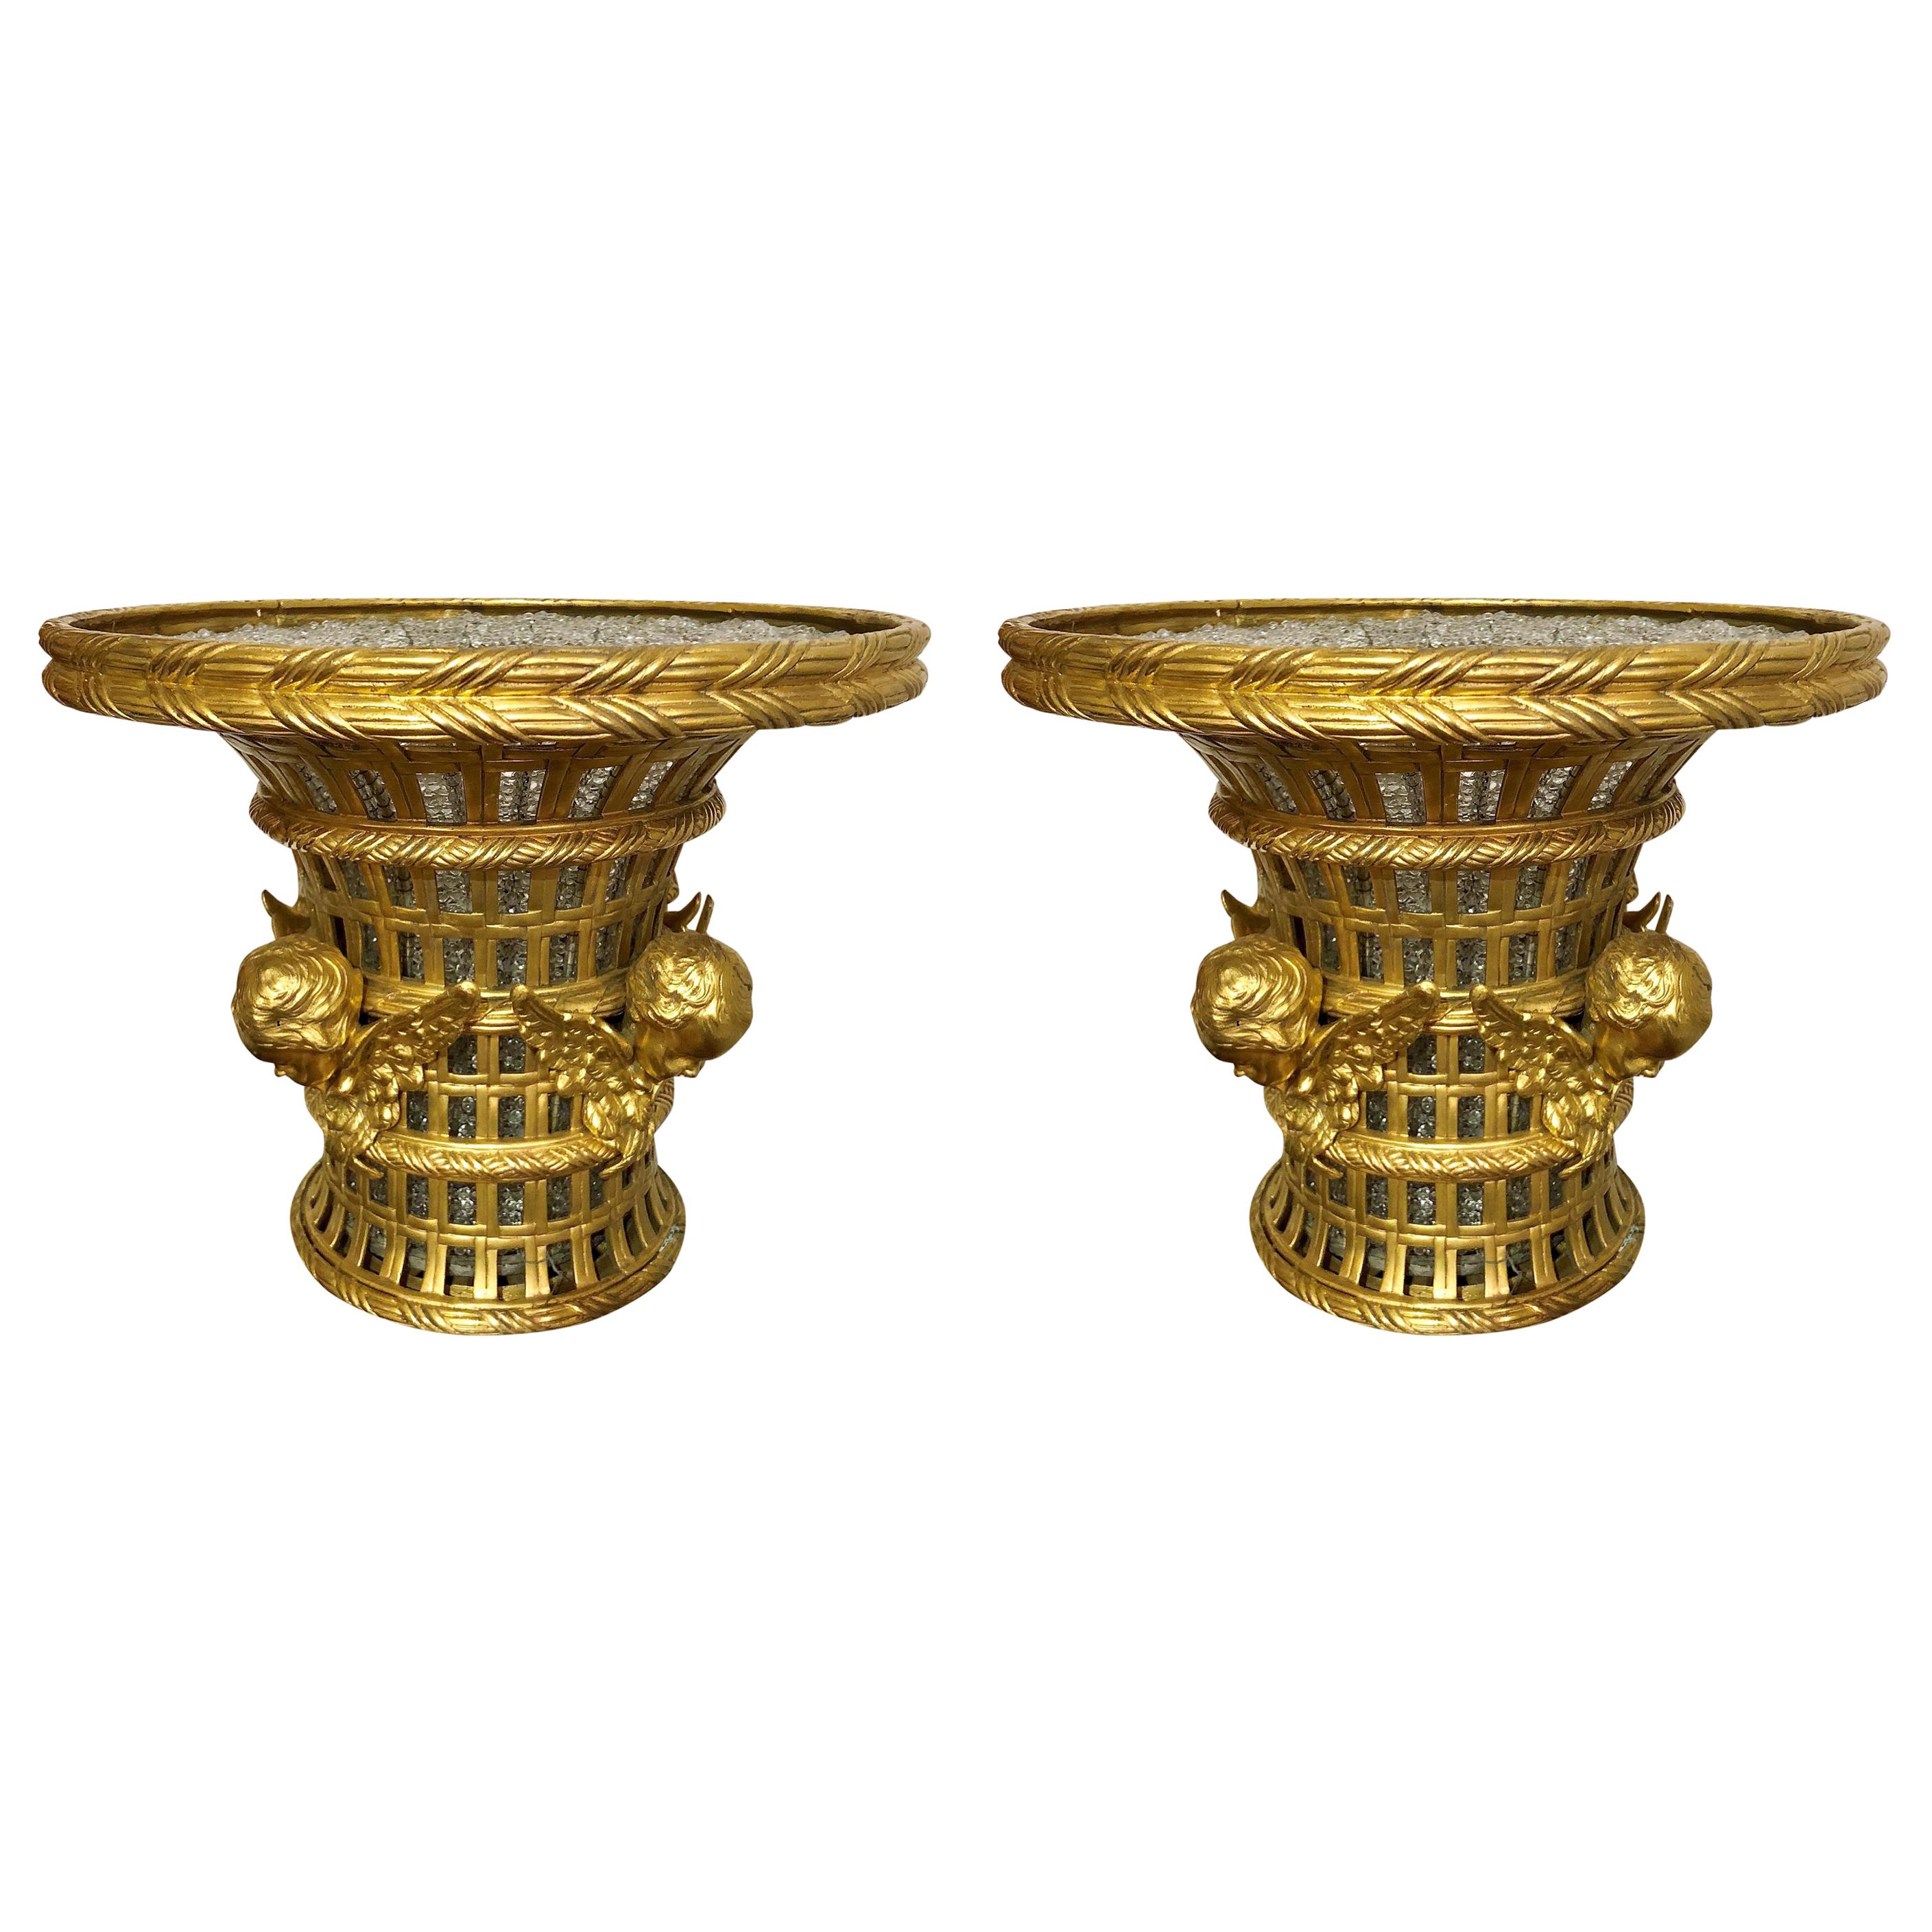 Pair of Antique French Bronze D'ore and Crystal Cachepots